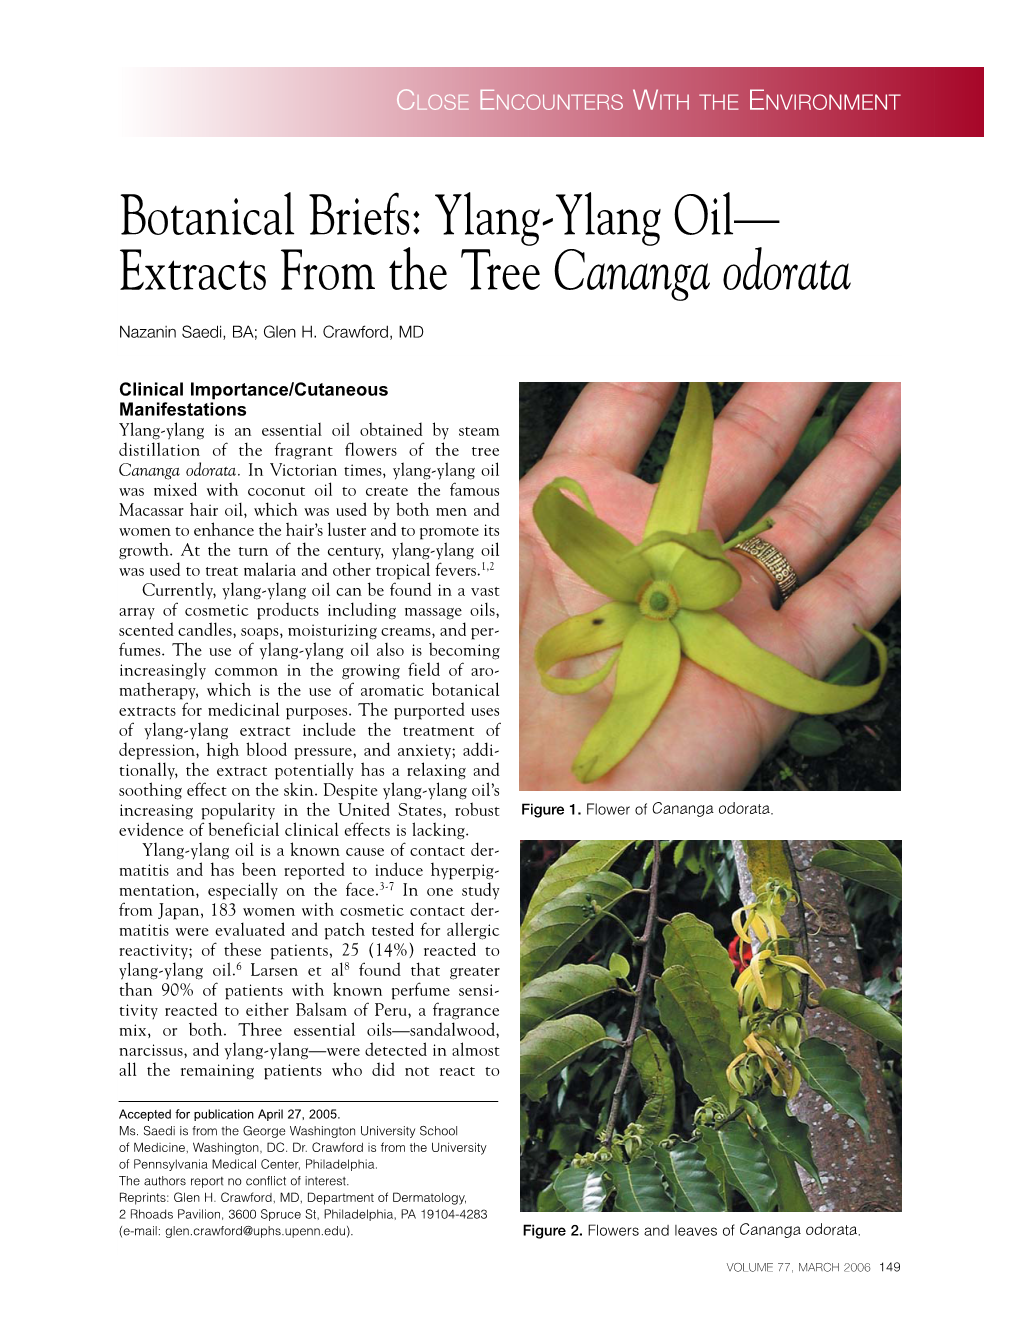 Botanical Briefs: Ylang-Ylang Oil— Extracts from the Tree Cananga Odorata